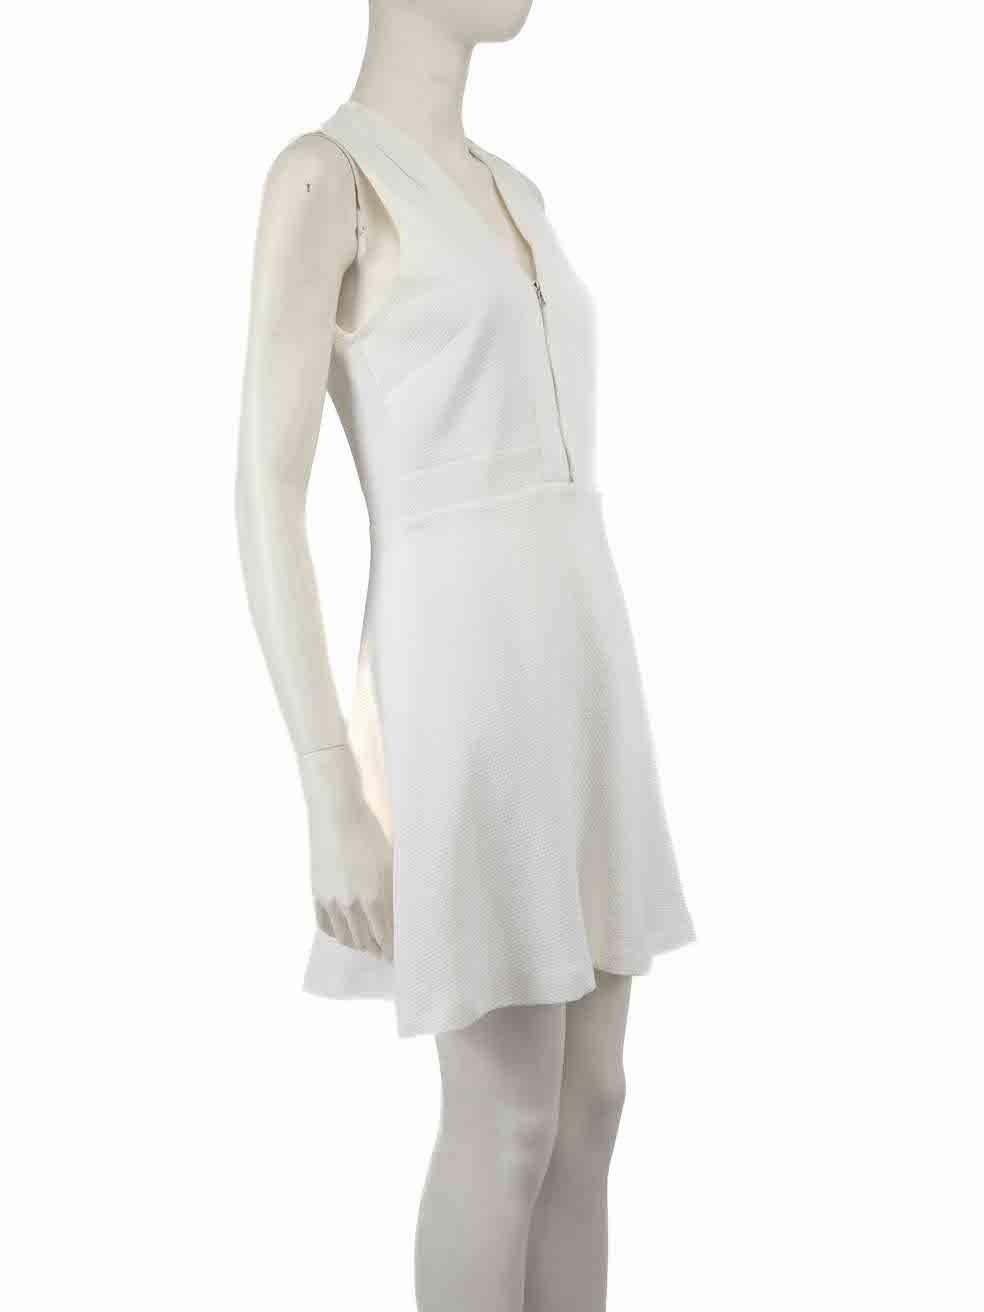 CONDITION is Very good. Hardly any visible wear to dress is evident on this used Sandro designer resale item.
 
 
 
 Details
 
 
 White
 
 Polyester
 
 Mini dress
 
 Textured
 
 Cut out detail on front and back
 
 Sleeveless
 
 V neckline
 
 Front